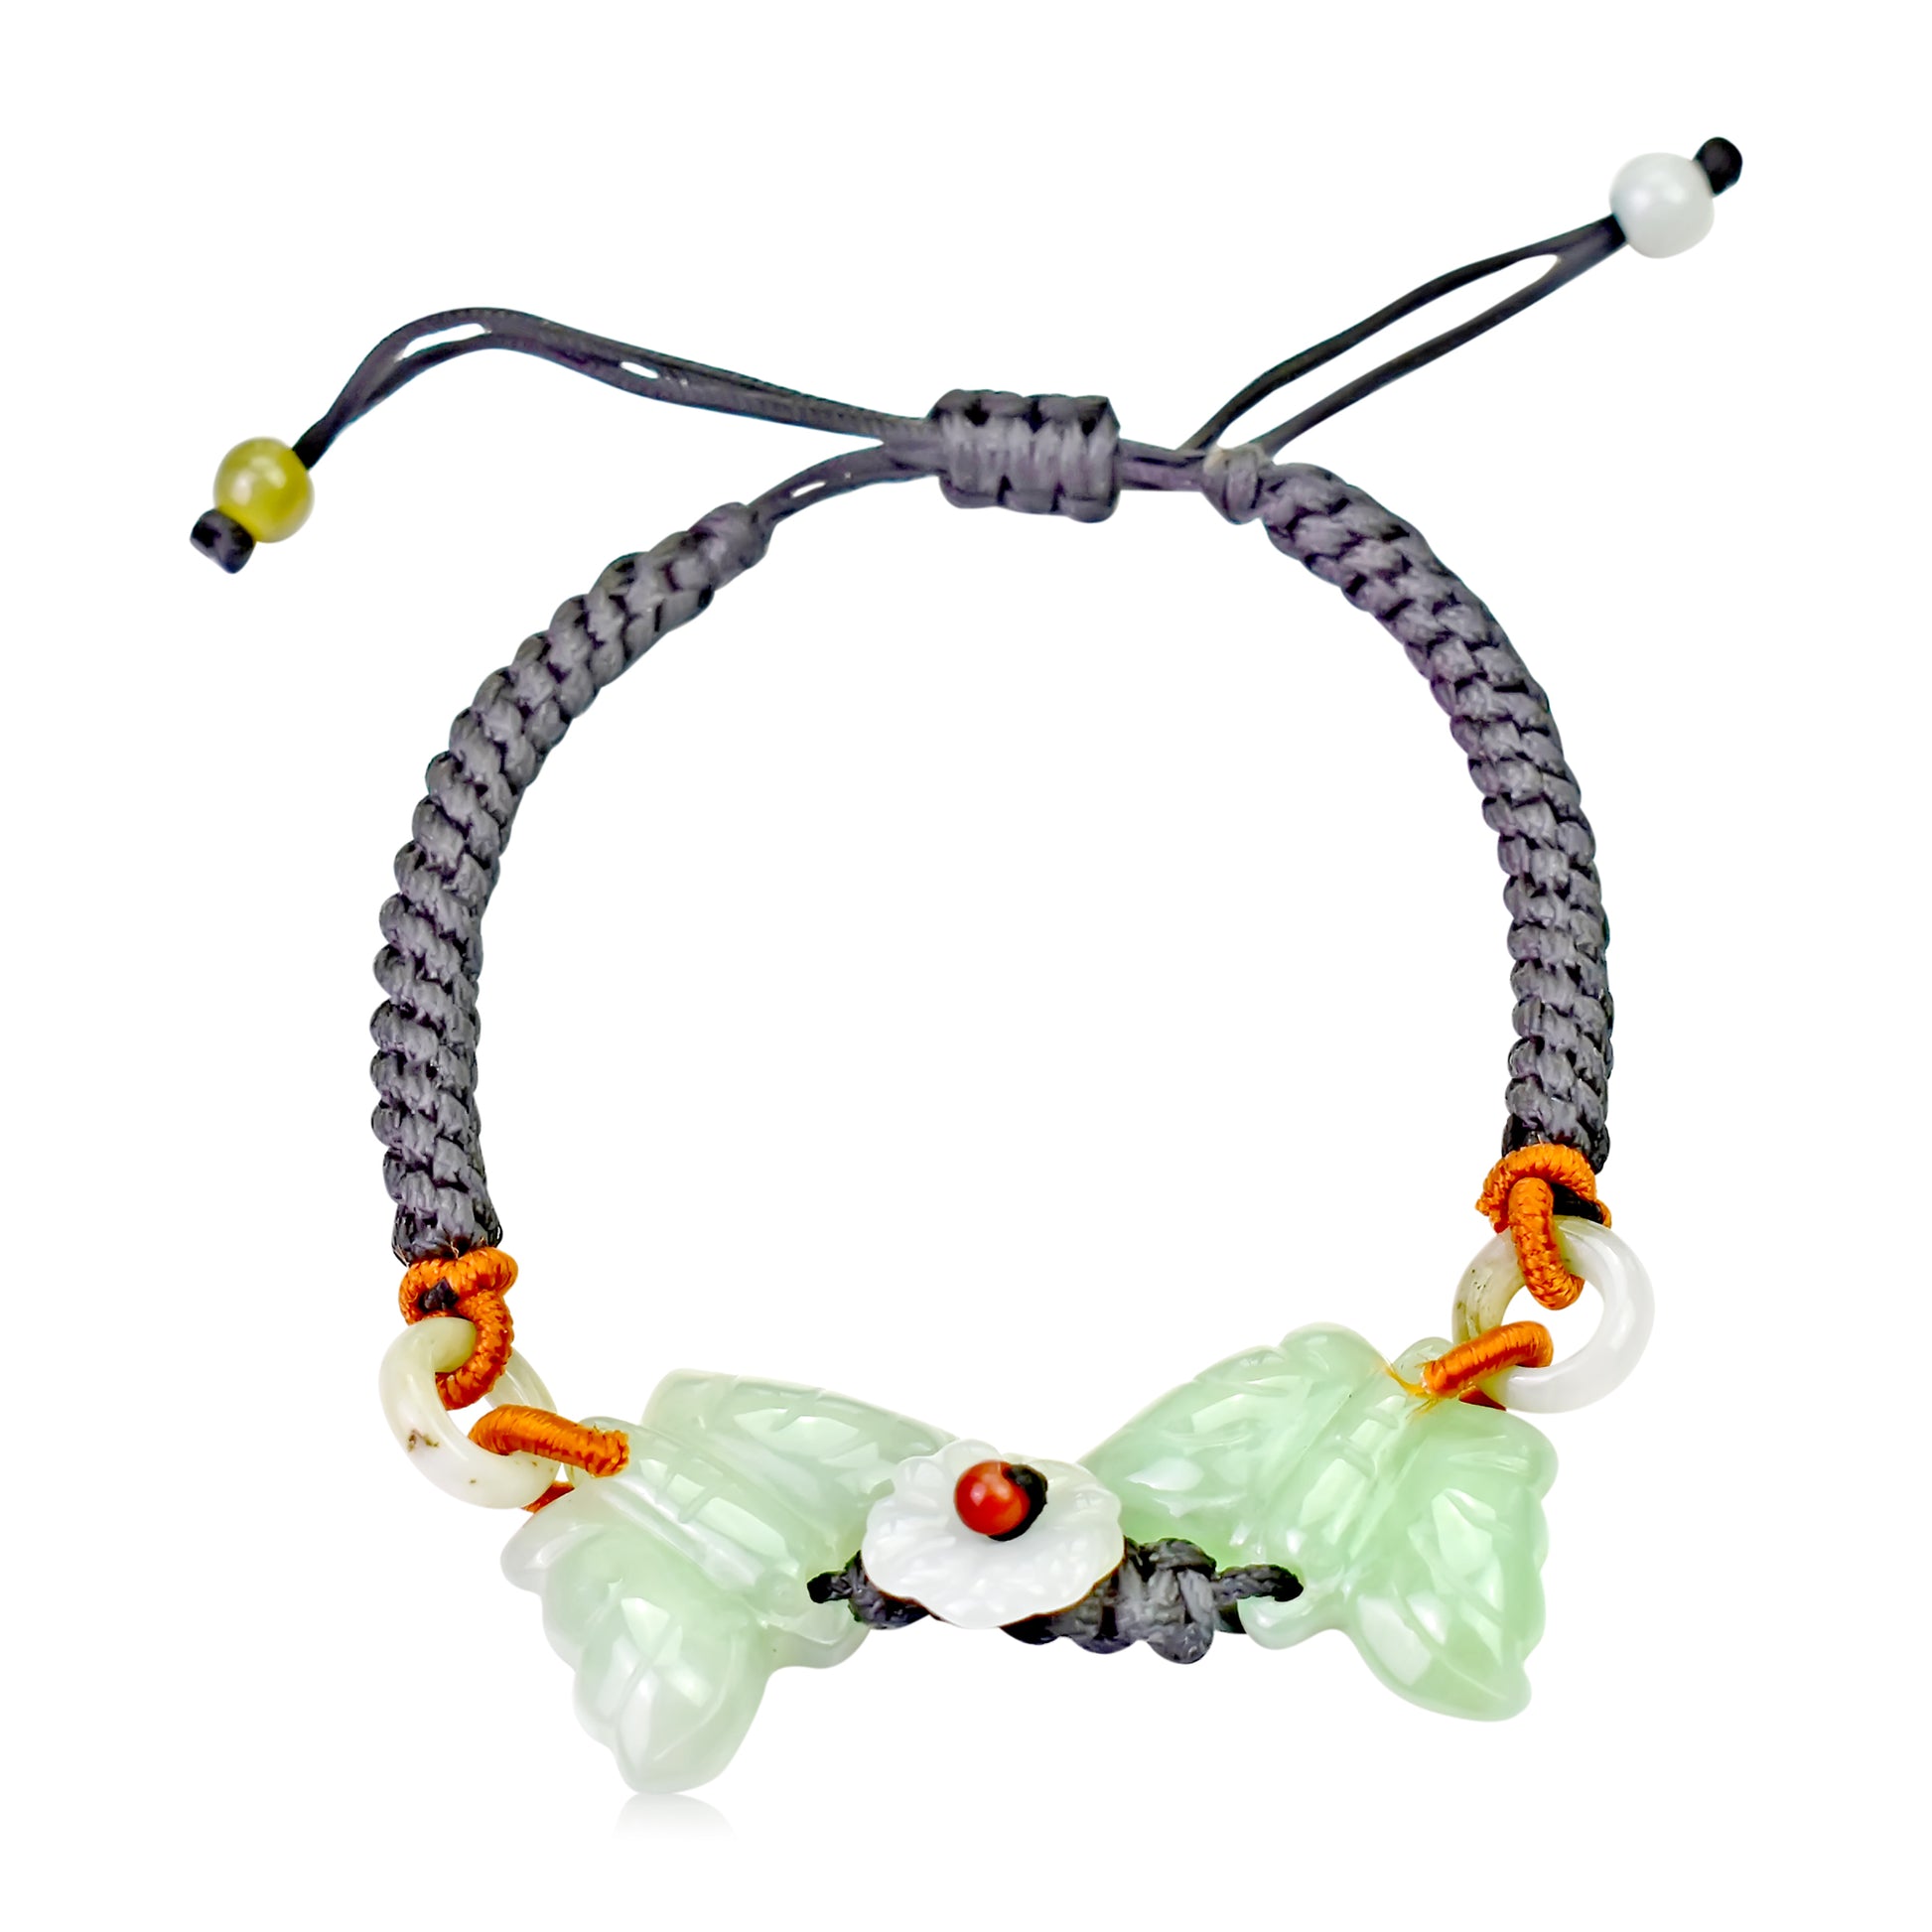 Fly Away with Style with Two Joyful Butterflies Jade Bracelet made with Black Cord